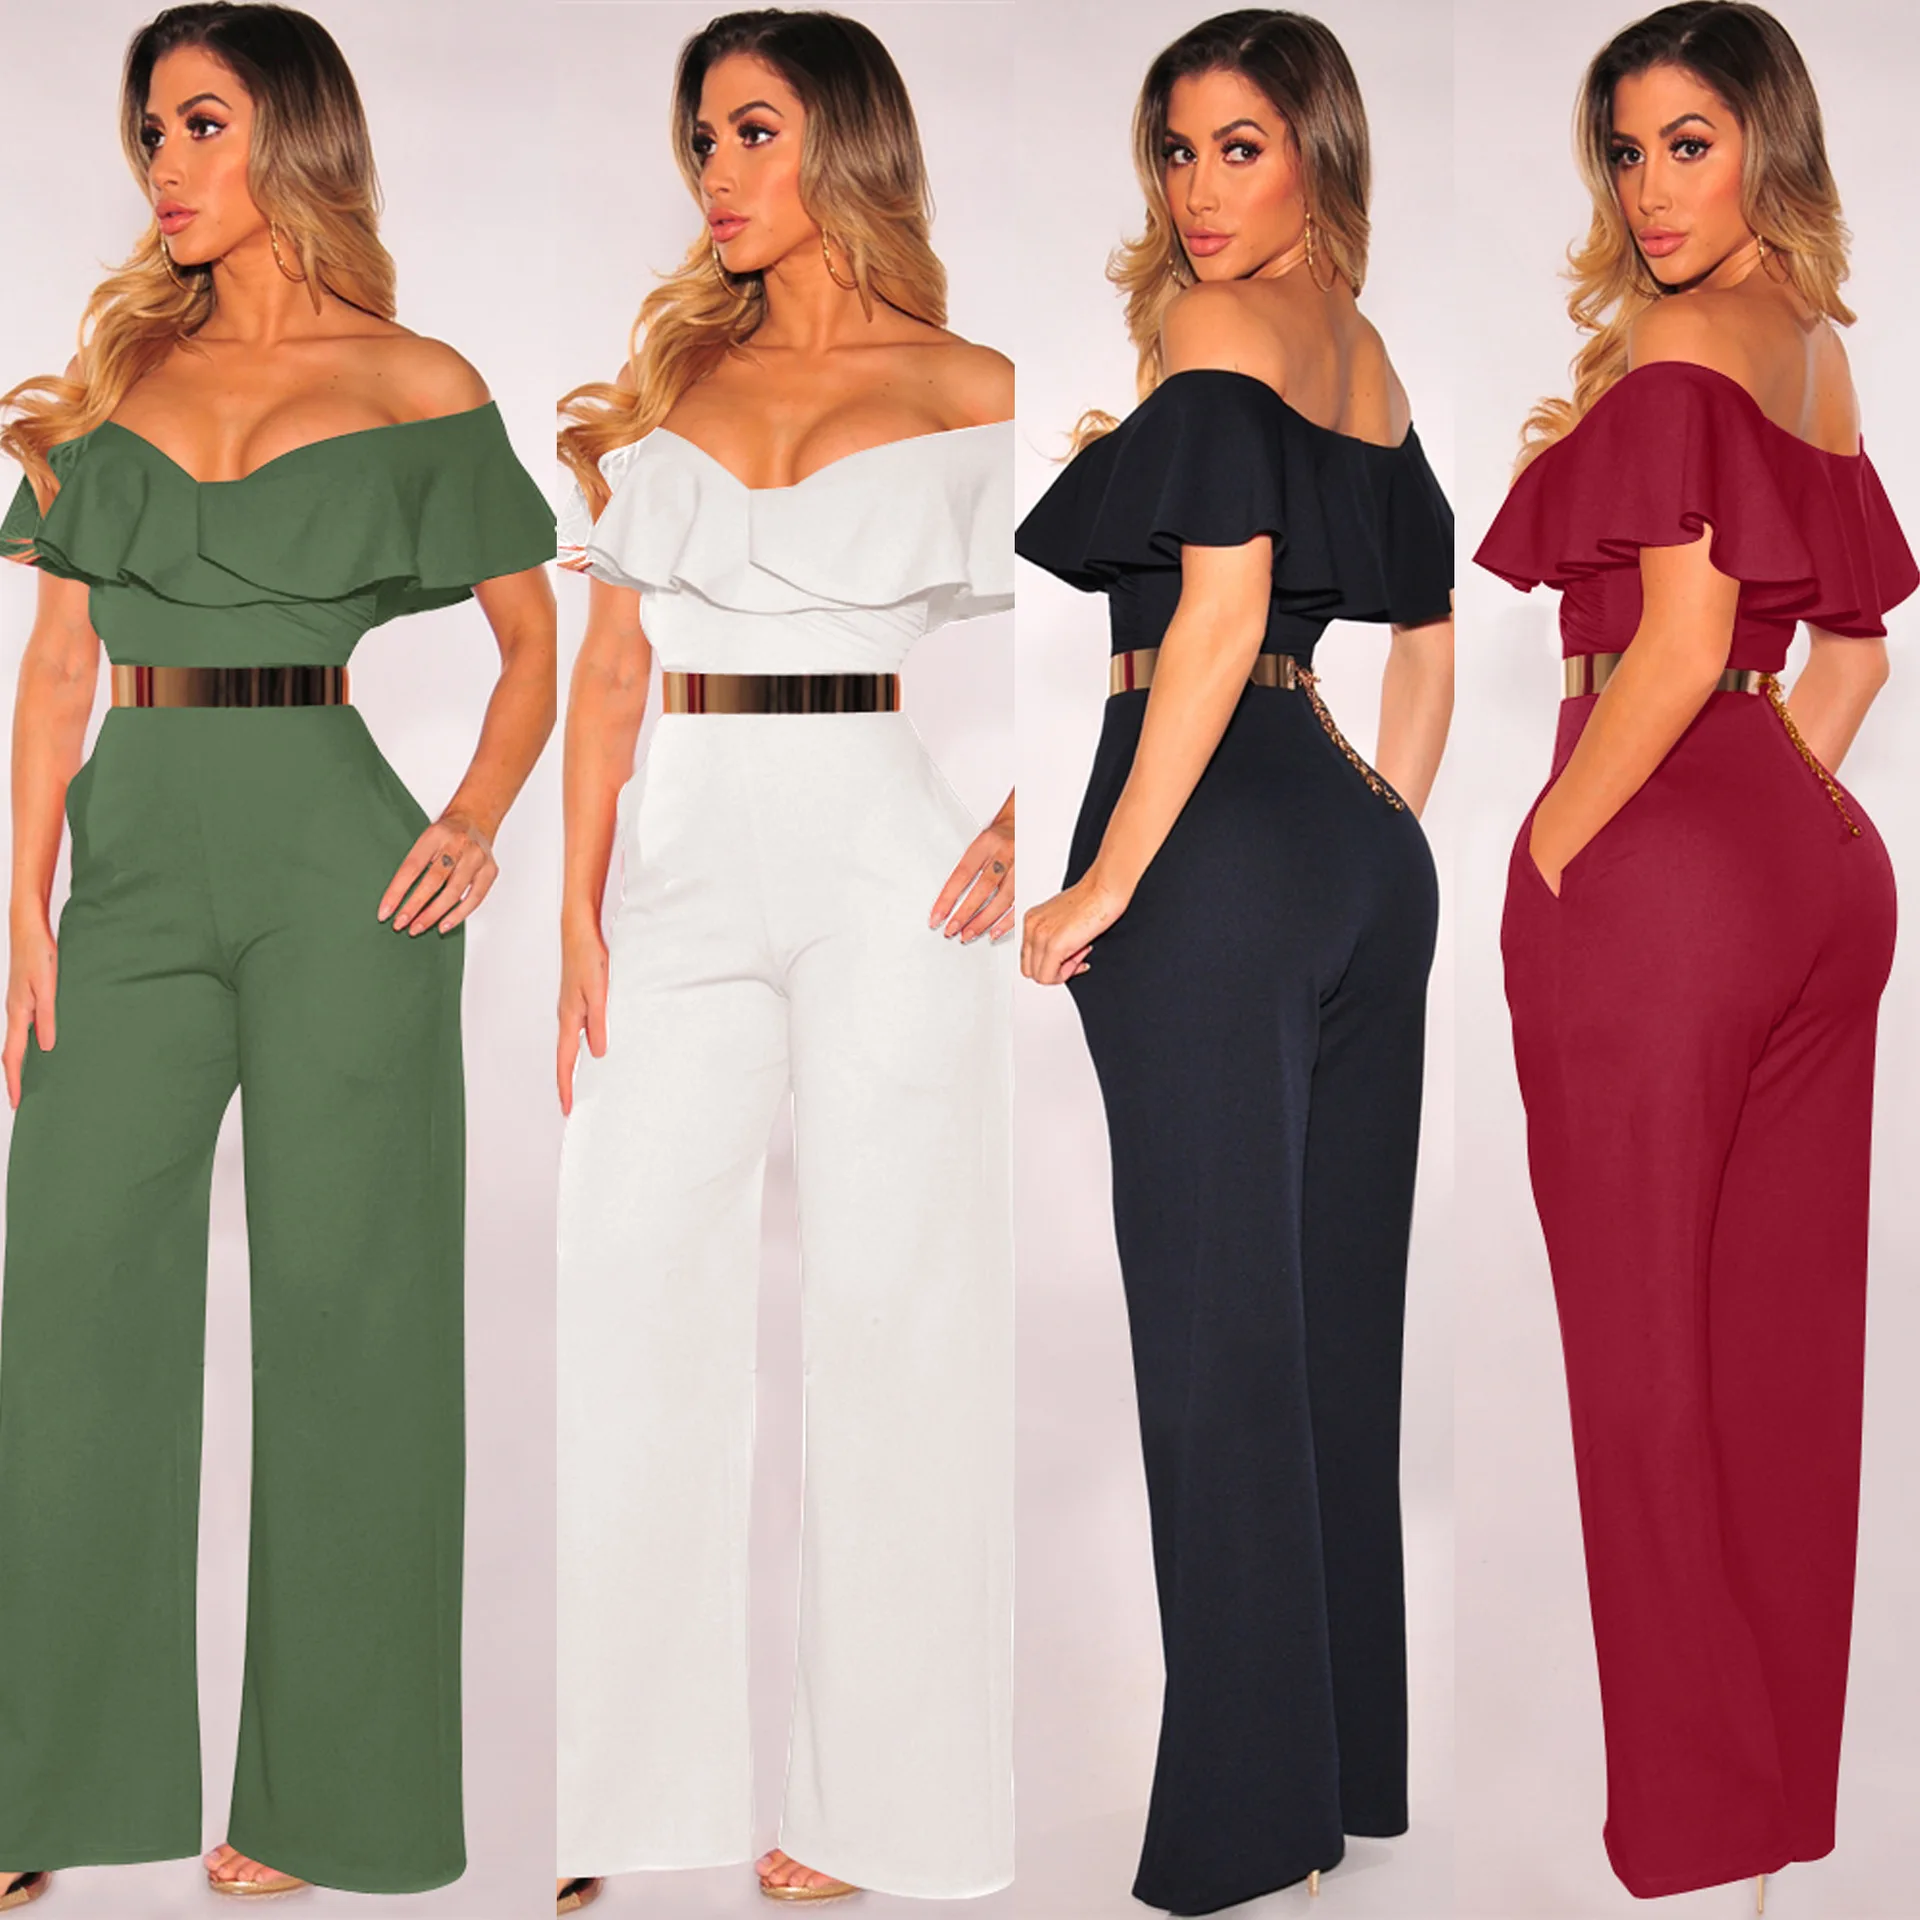 

Elegant Lady Wide Leg Strapless Ruffled Collar Womens One Piece Metal Belt V Neck Off Shoulder Rompers Jumpsuits, White/black/red/army green